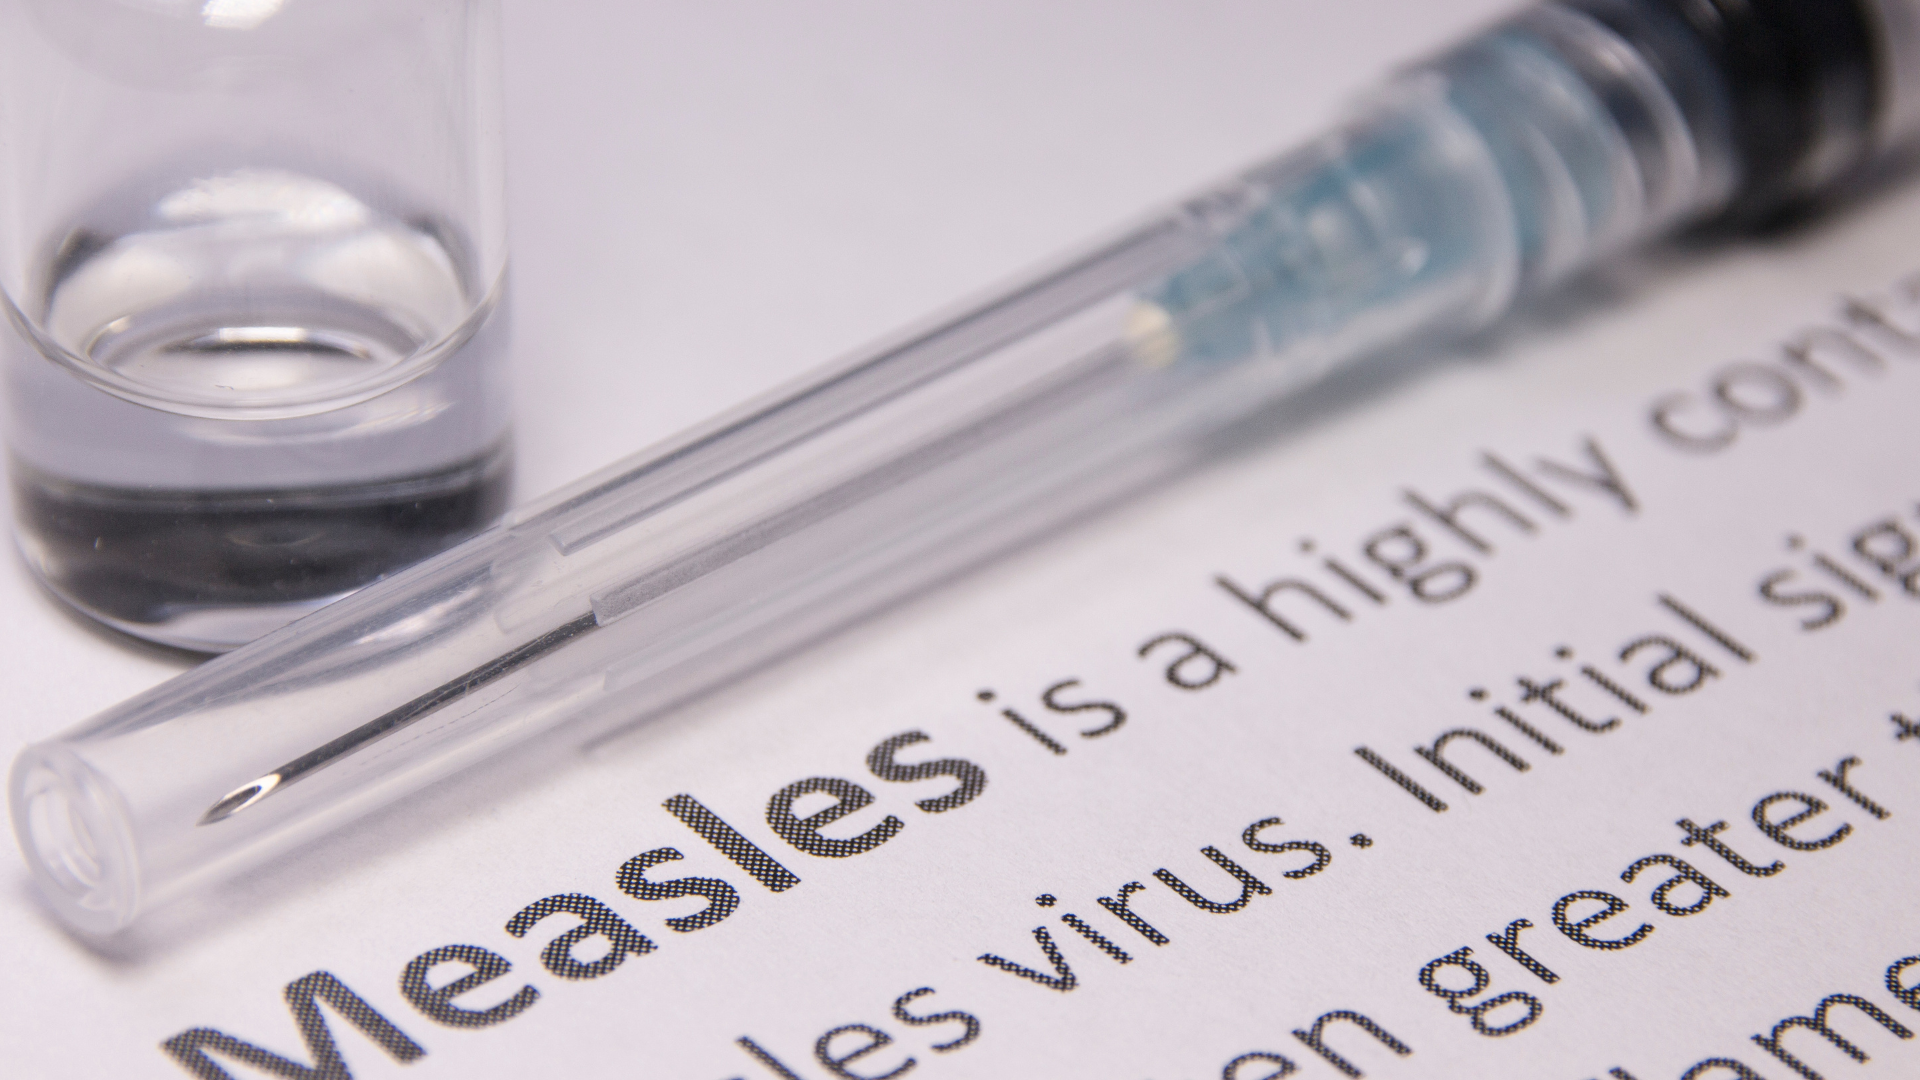 The image shows a document with the word measles and an explanation that the virus is highly contagious. The image also shows a vaccine vial and needle.